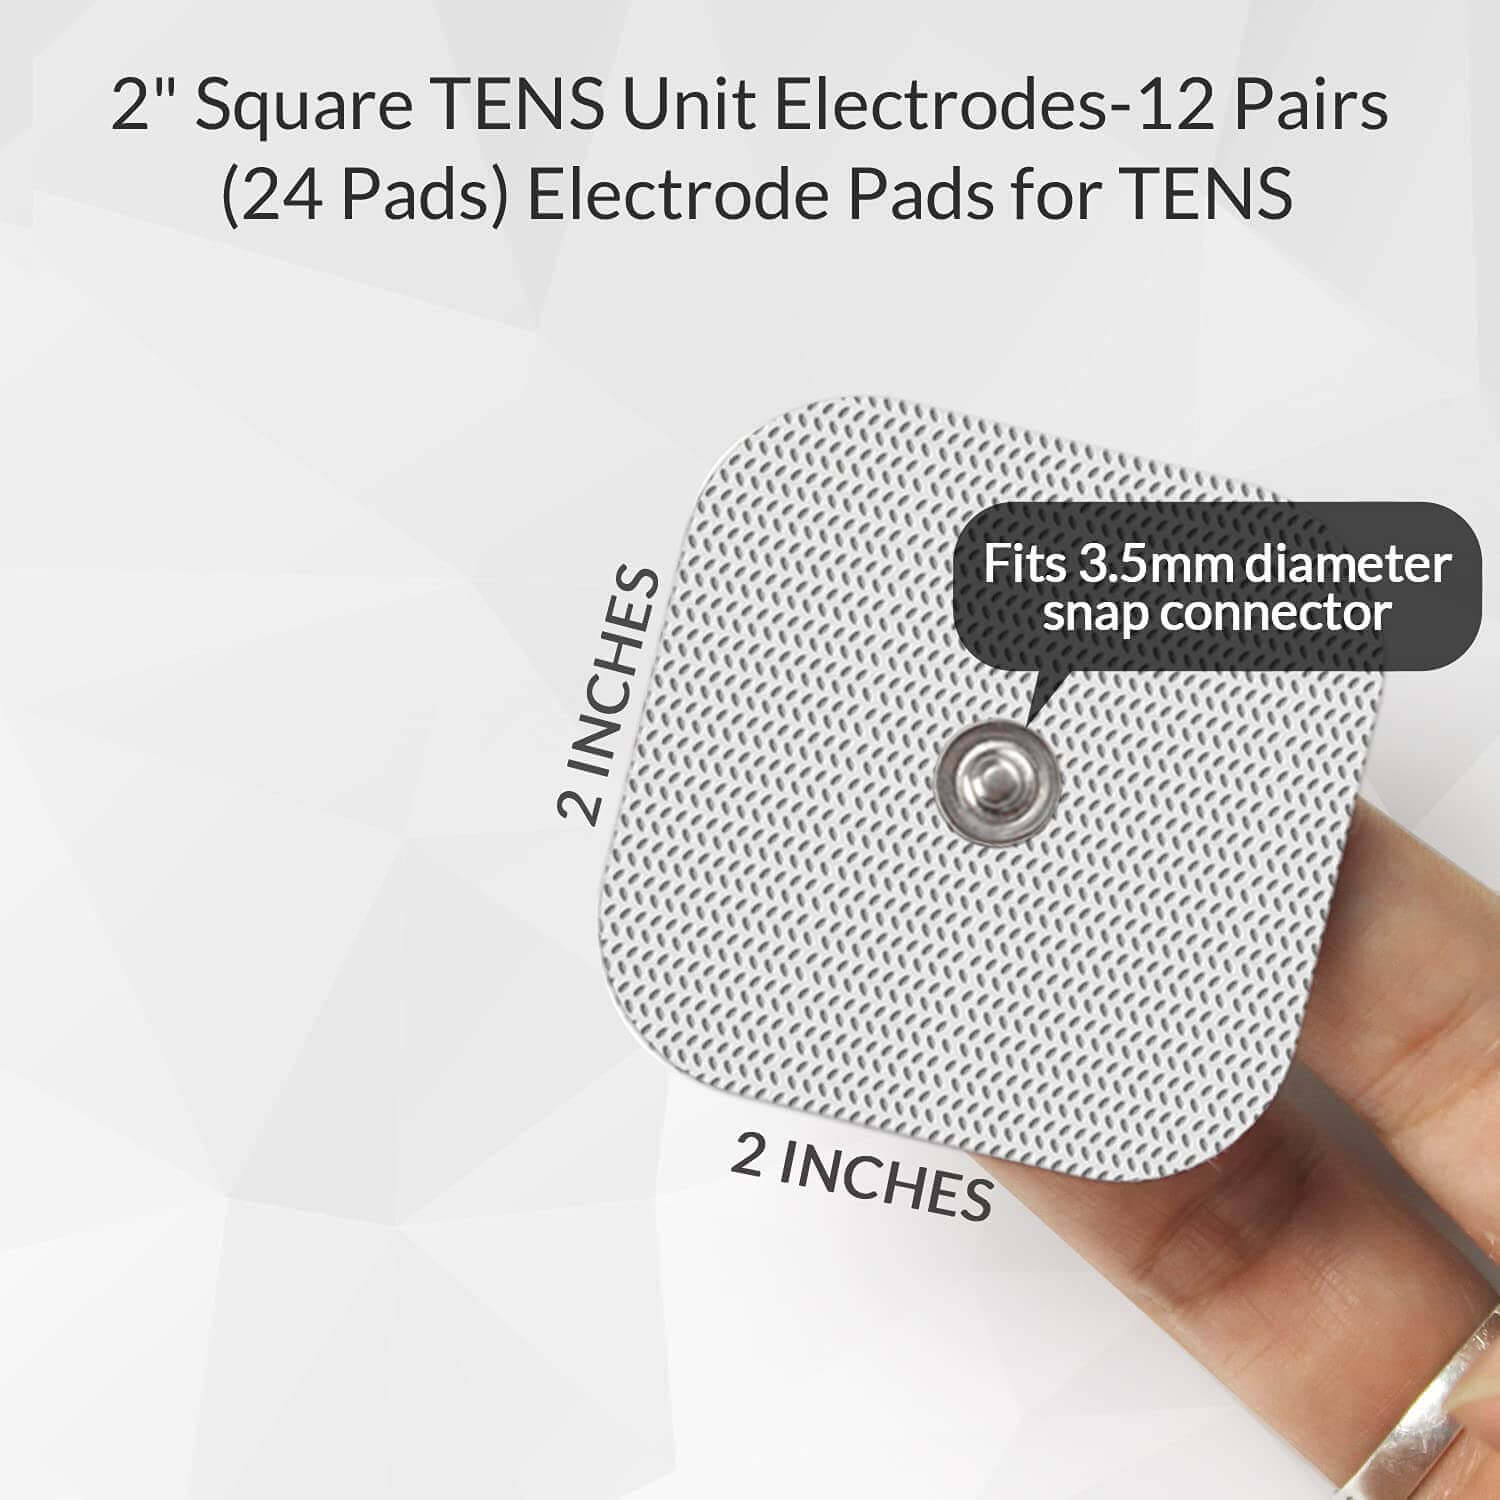 DONECO Electrodes Pads - 2in Square TENS Unit - Snap On Pads 24 Pcs for TENS Therapy - electrode pads for tens